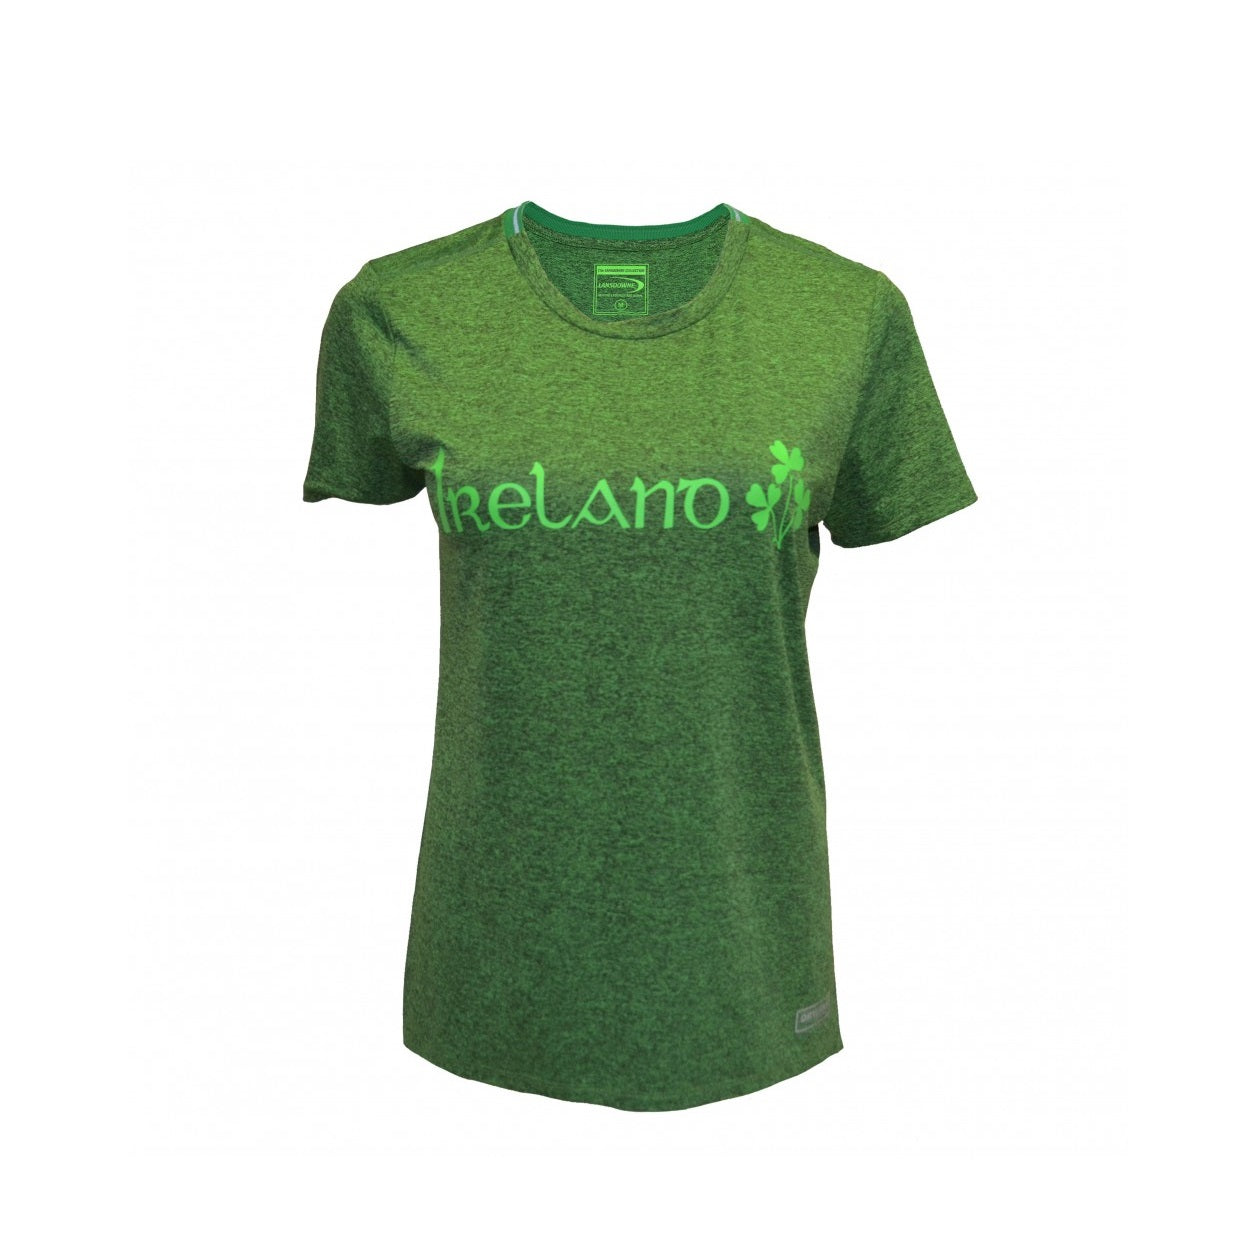 Lansdowne Ireland Women's Performance T-Shirt Grindle Green  Women’s t-shirt crafted from a performance fabric that’s designed to regulate body temperature, keeping you cool and dry. The dry fit performance material helps draw moisture away from the skin and enhances breathability and comfort Classic crew neck tee with Ireland Shamrock print design.  - 90% polyester 10% elastane - Short sleeves - Round neck - Relaxed fit